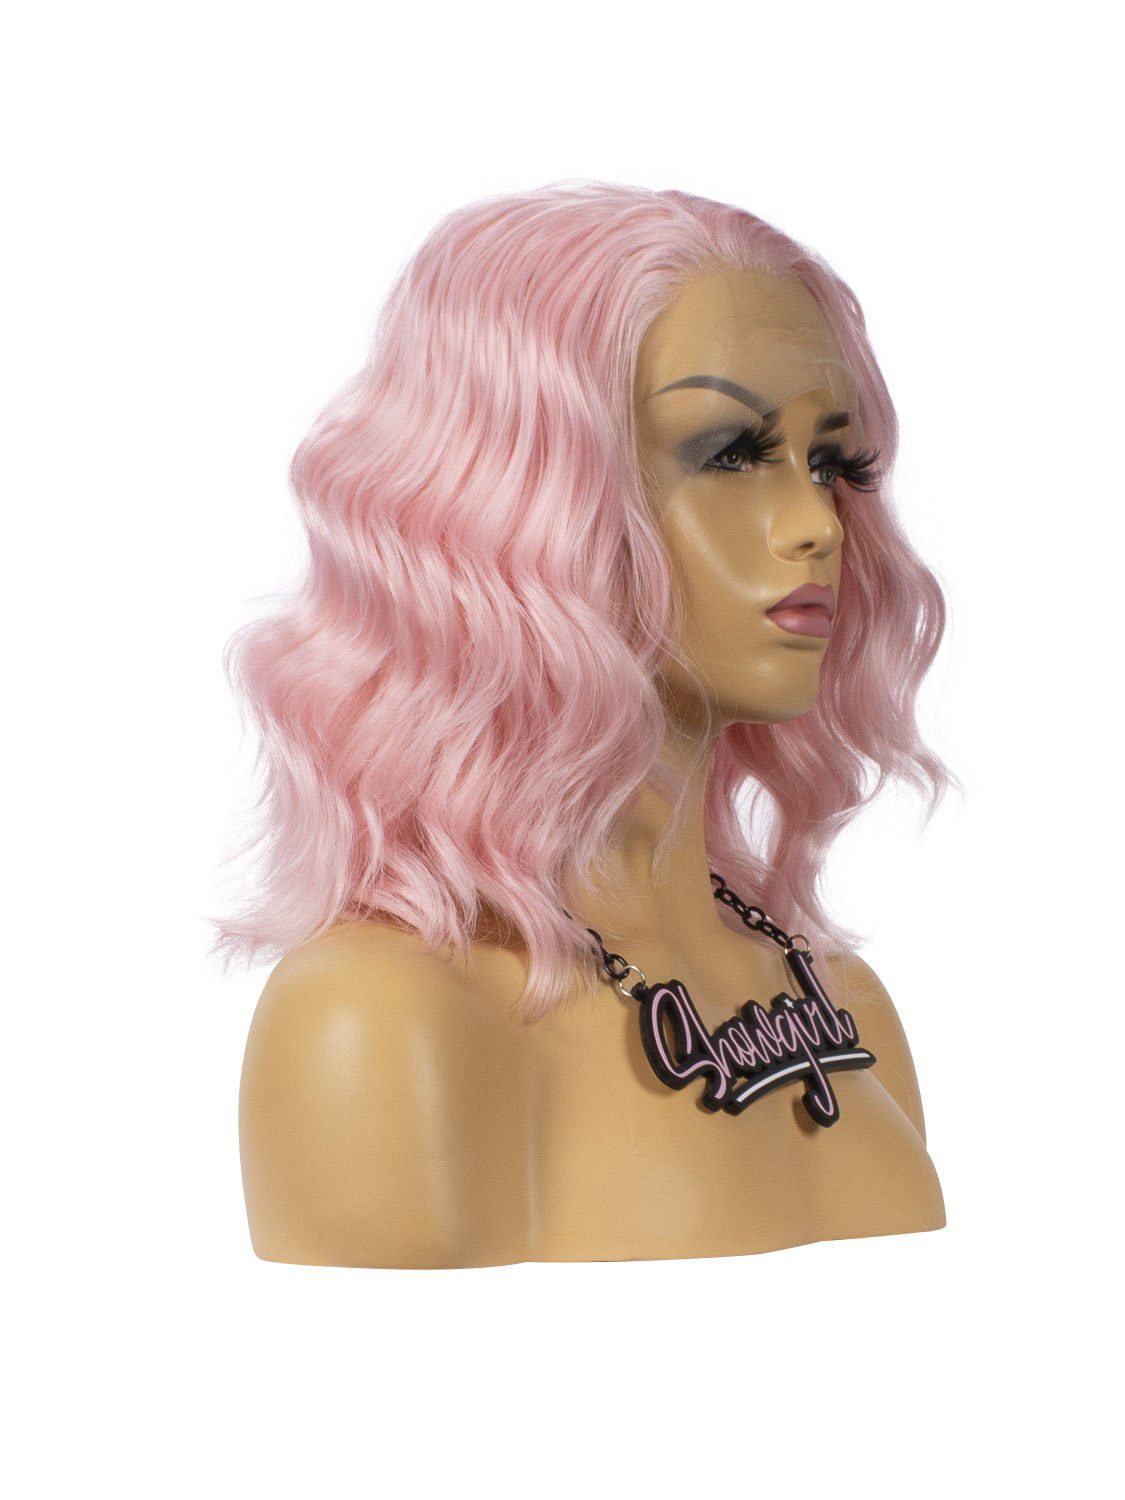 Showgirl Wigs: Mandy - Pink (Wigs) | The Showgirl Shop